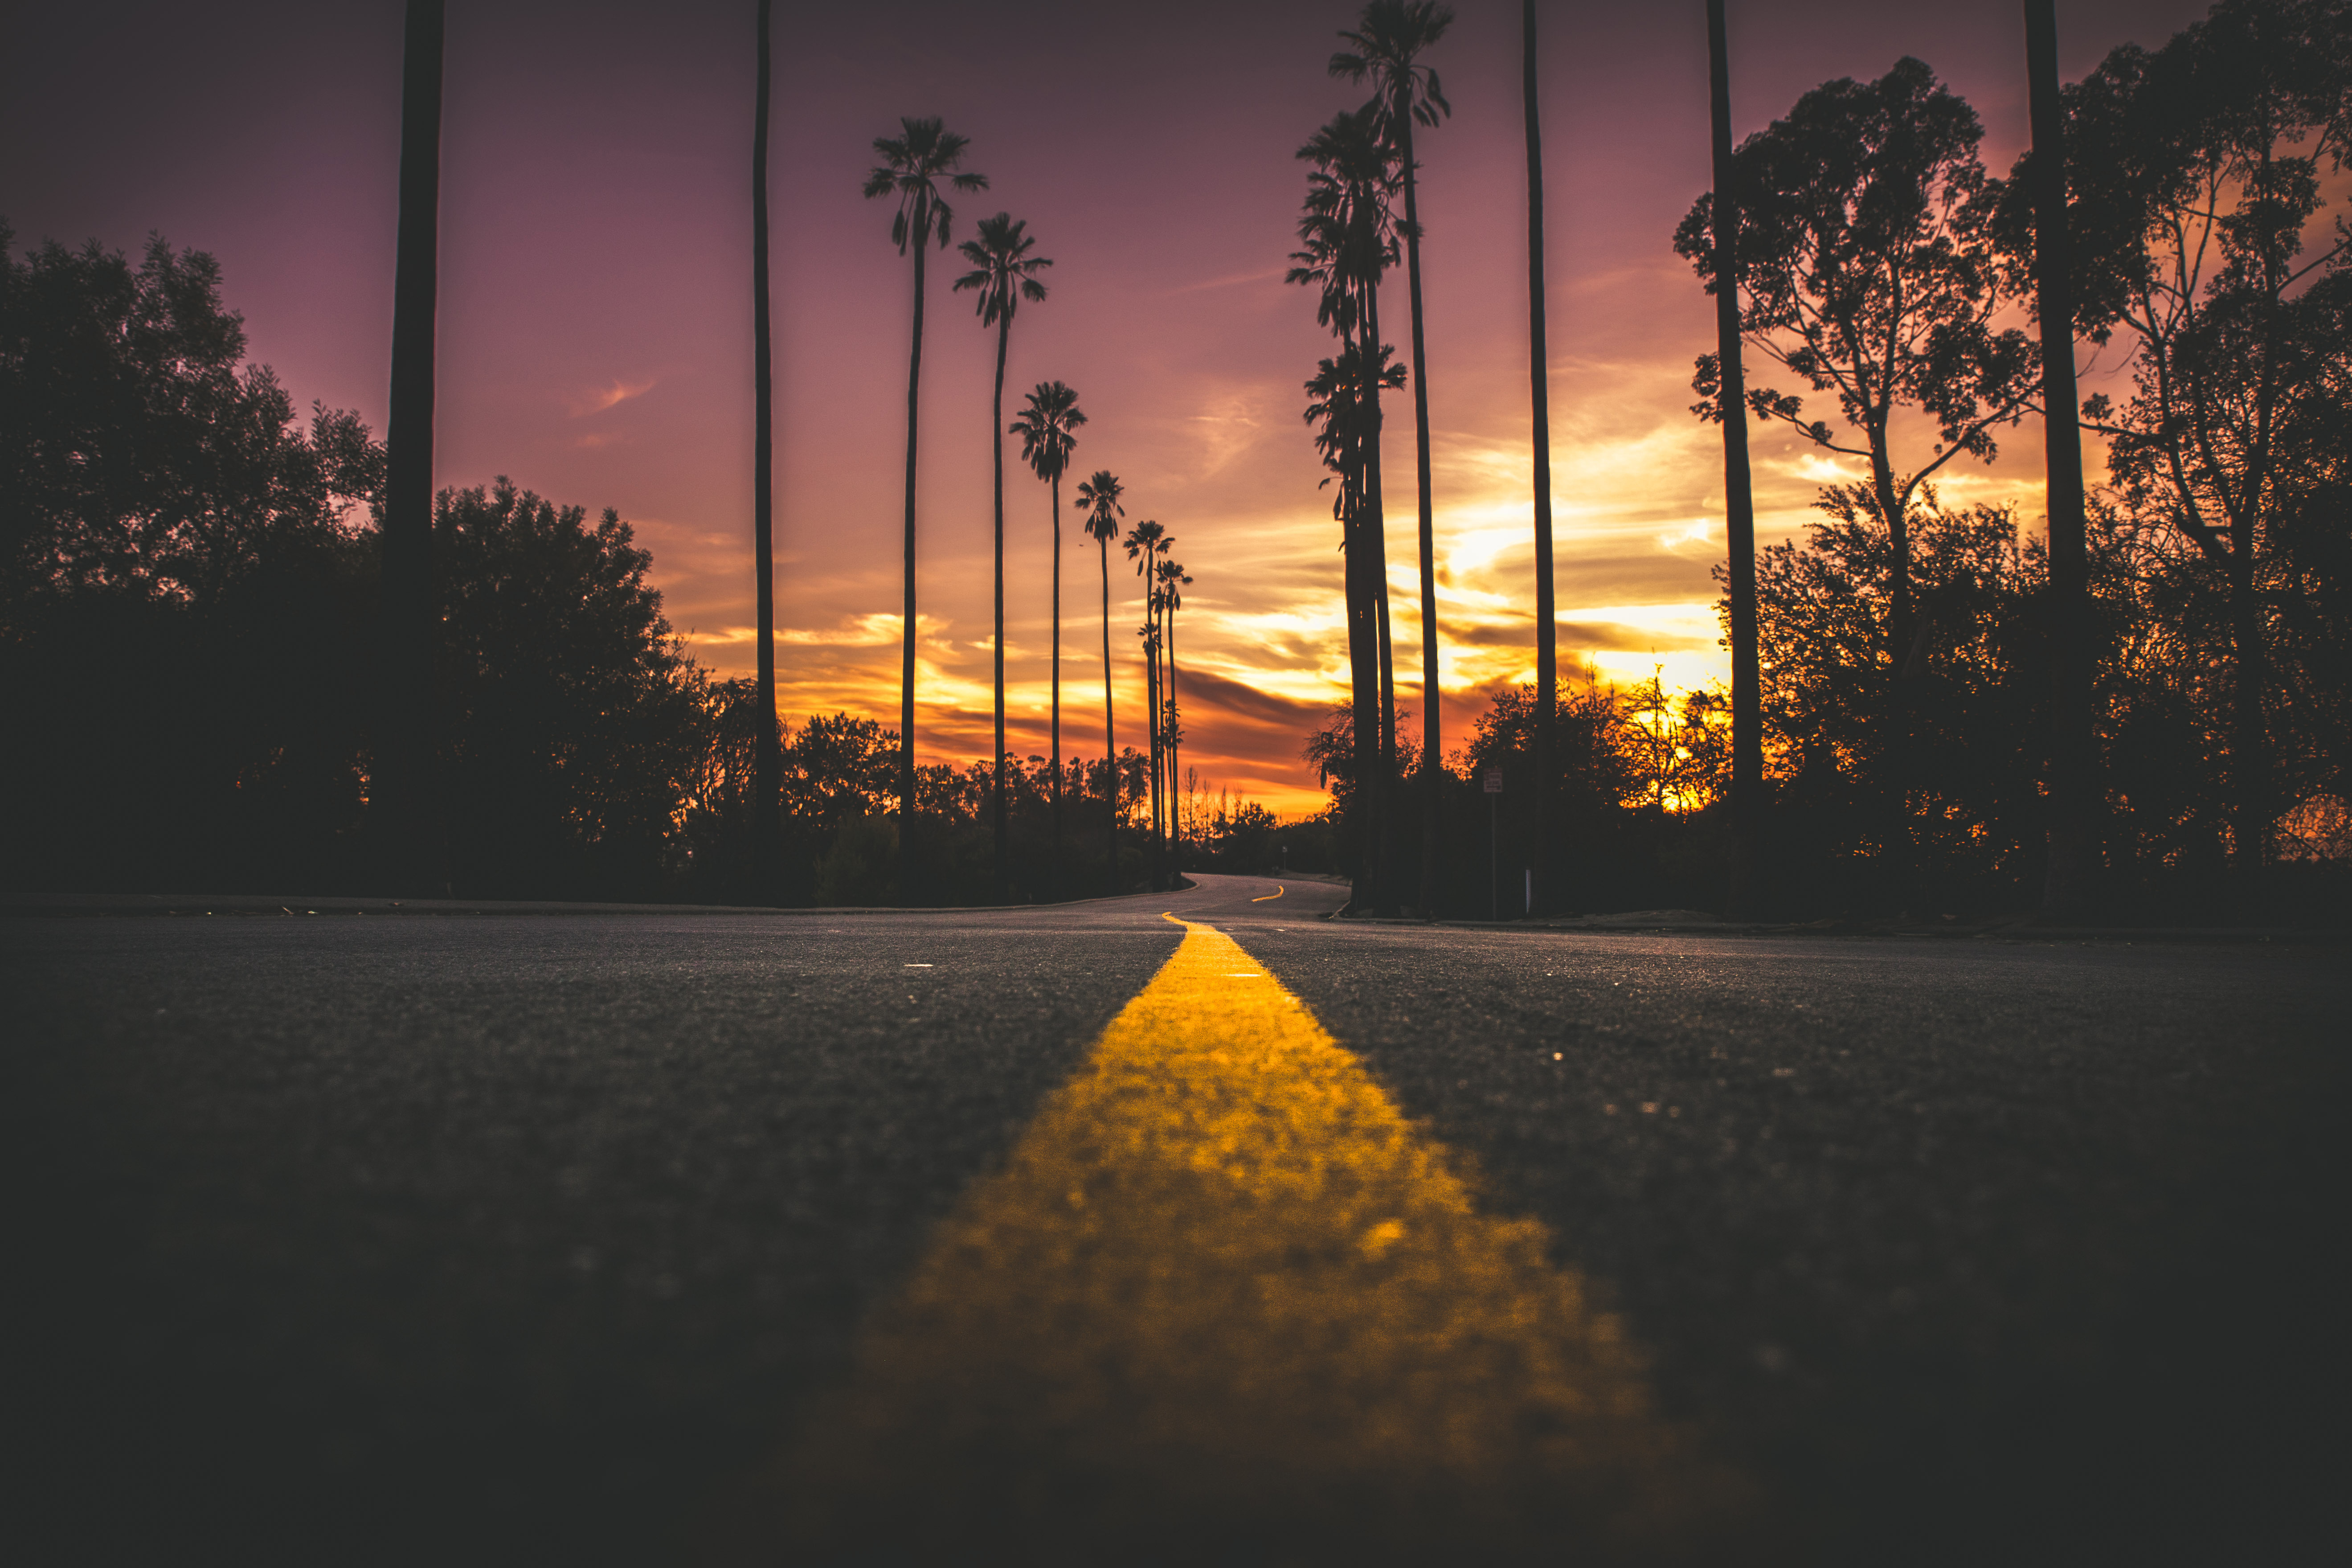 Road and sunset 4K wallpaper download